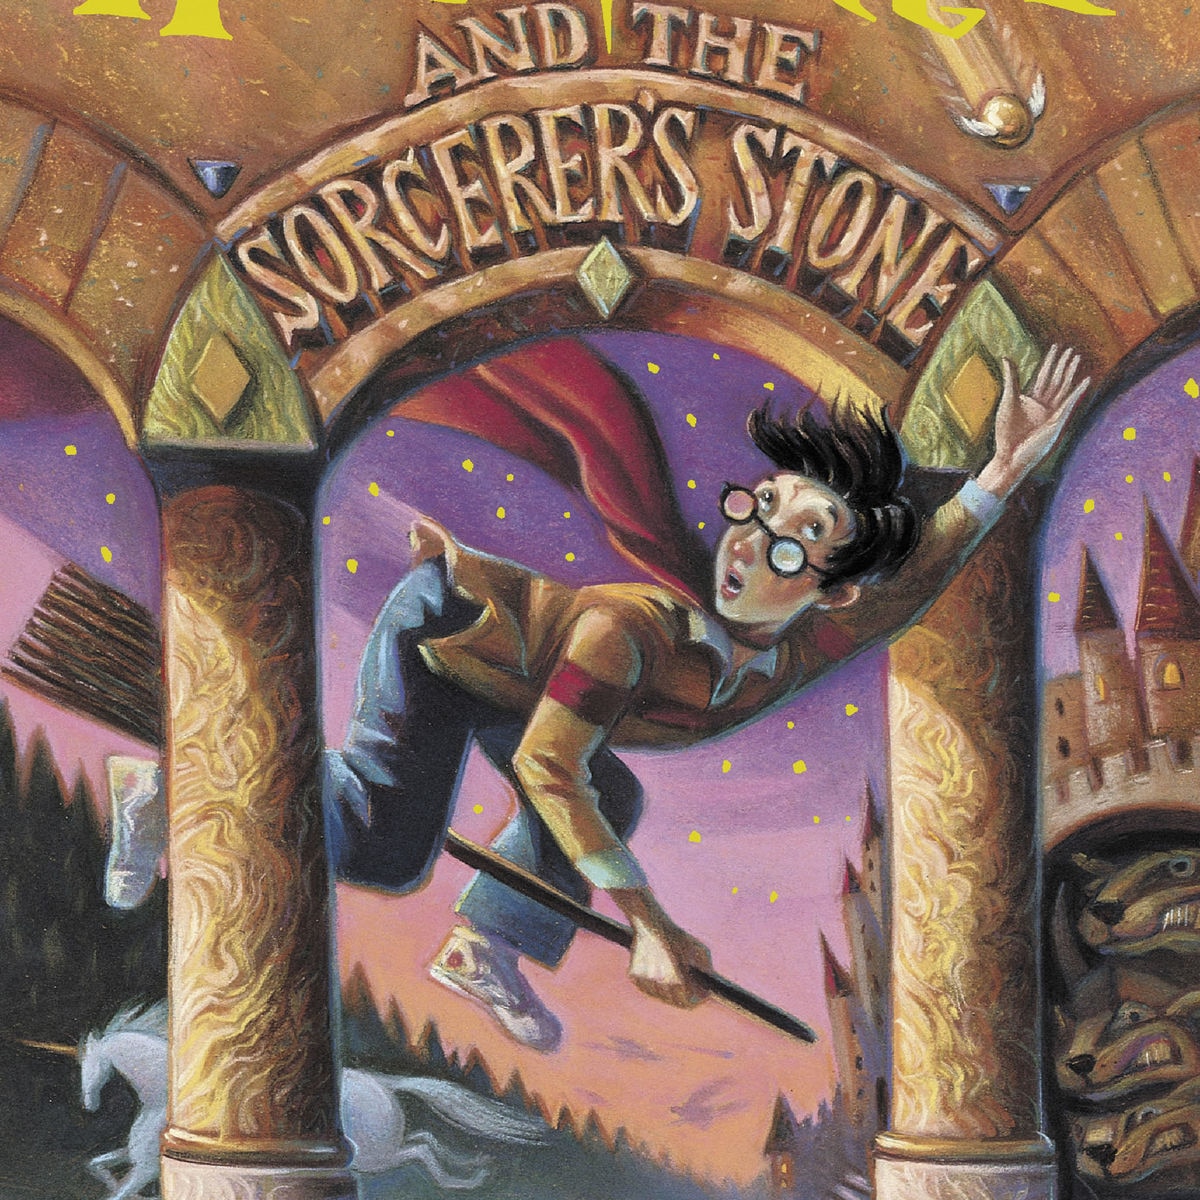 book review for harry potter and the sorcerer's stone